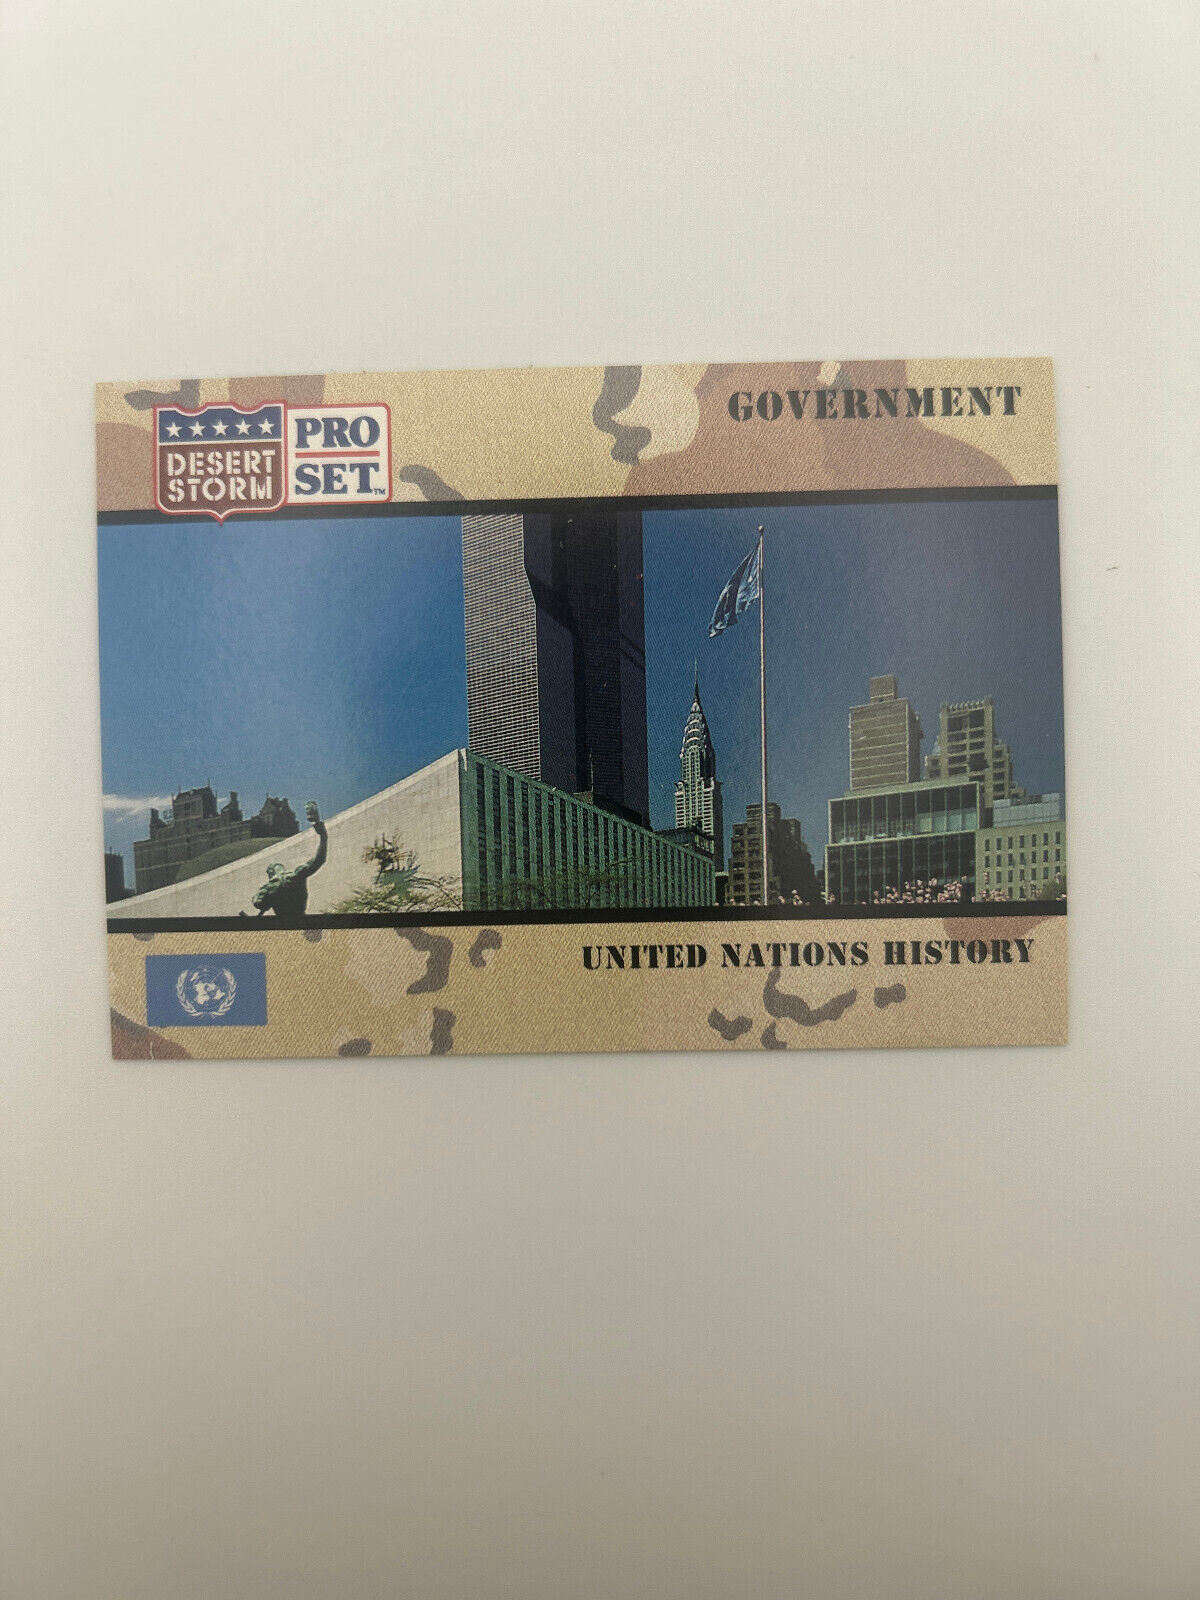 United Nations History #96  1991 Pro Set Desert Storm Government card